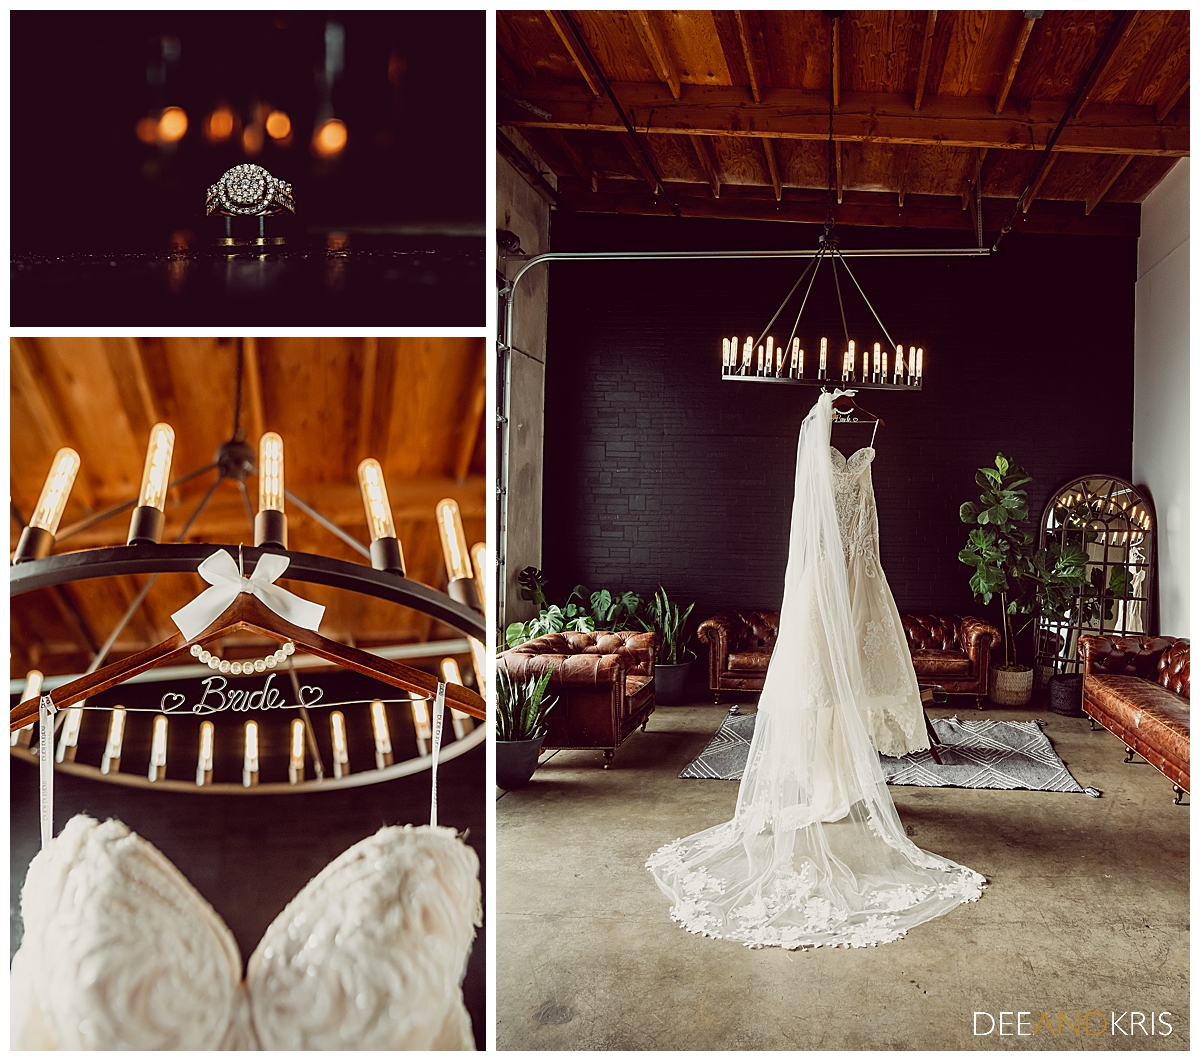 Three images: Top left image of rings stacked on each other with bokehed light in background. Bottom left image of personalized wooden hanger hooked on round chandelier and bustier of wedding gown. Right image of full gown hanging from chandelier.